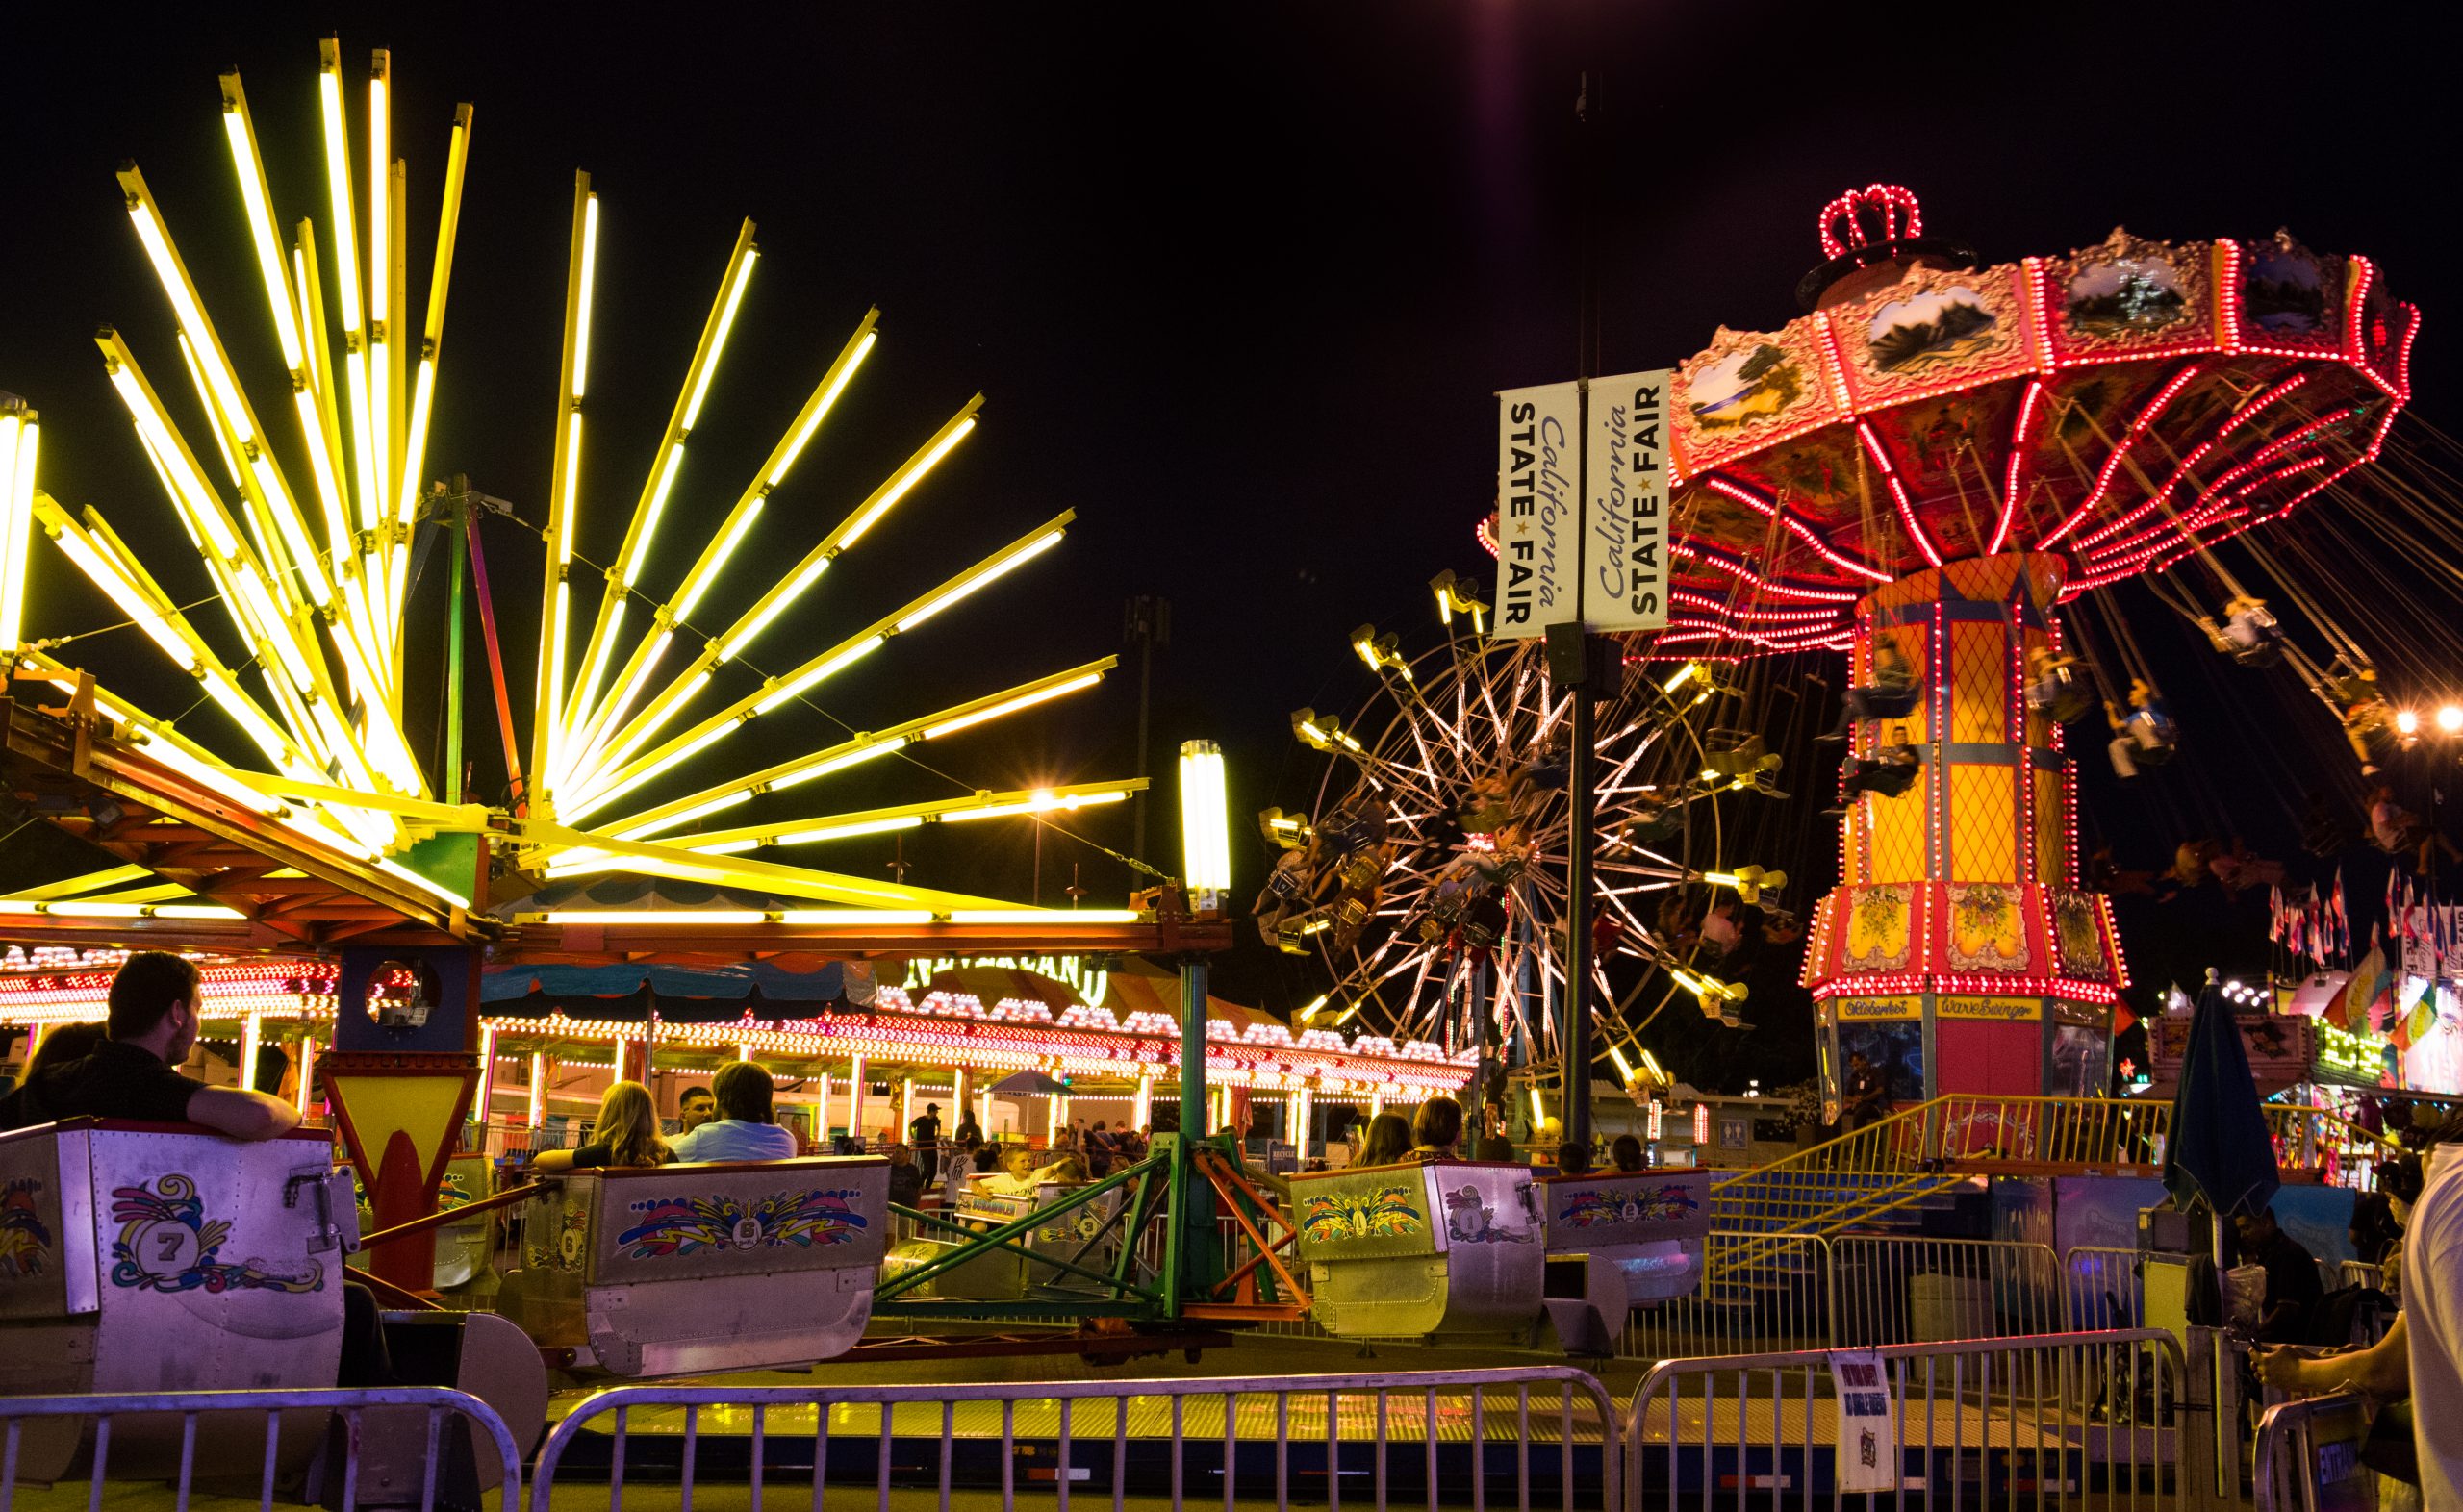 Rides at night 01 at CA State Fair - approved for media use